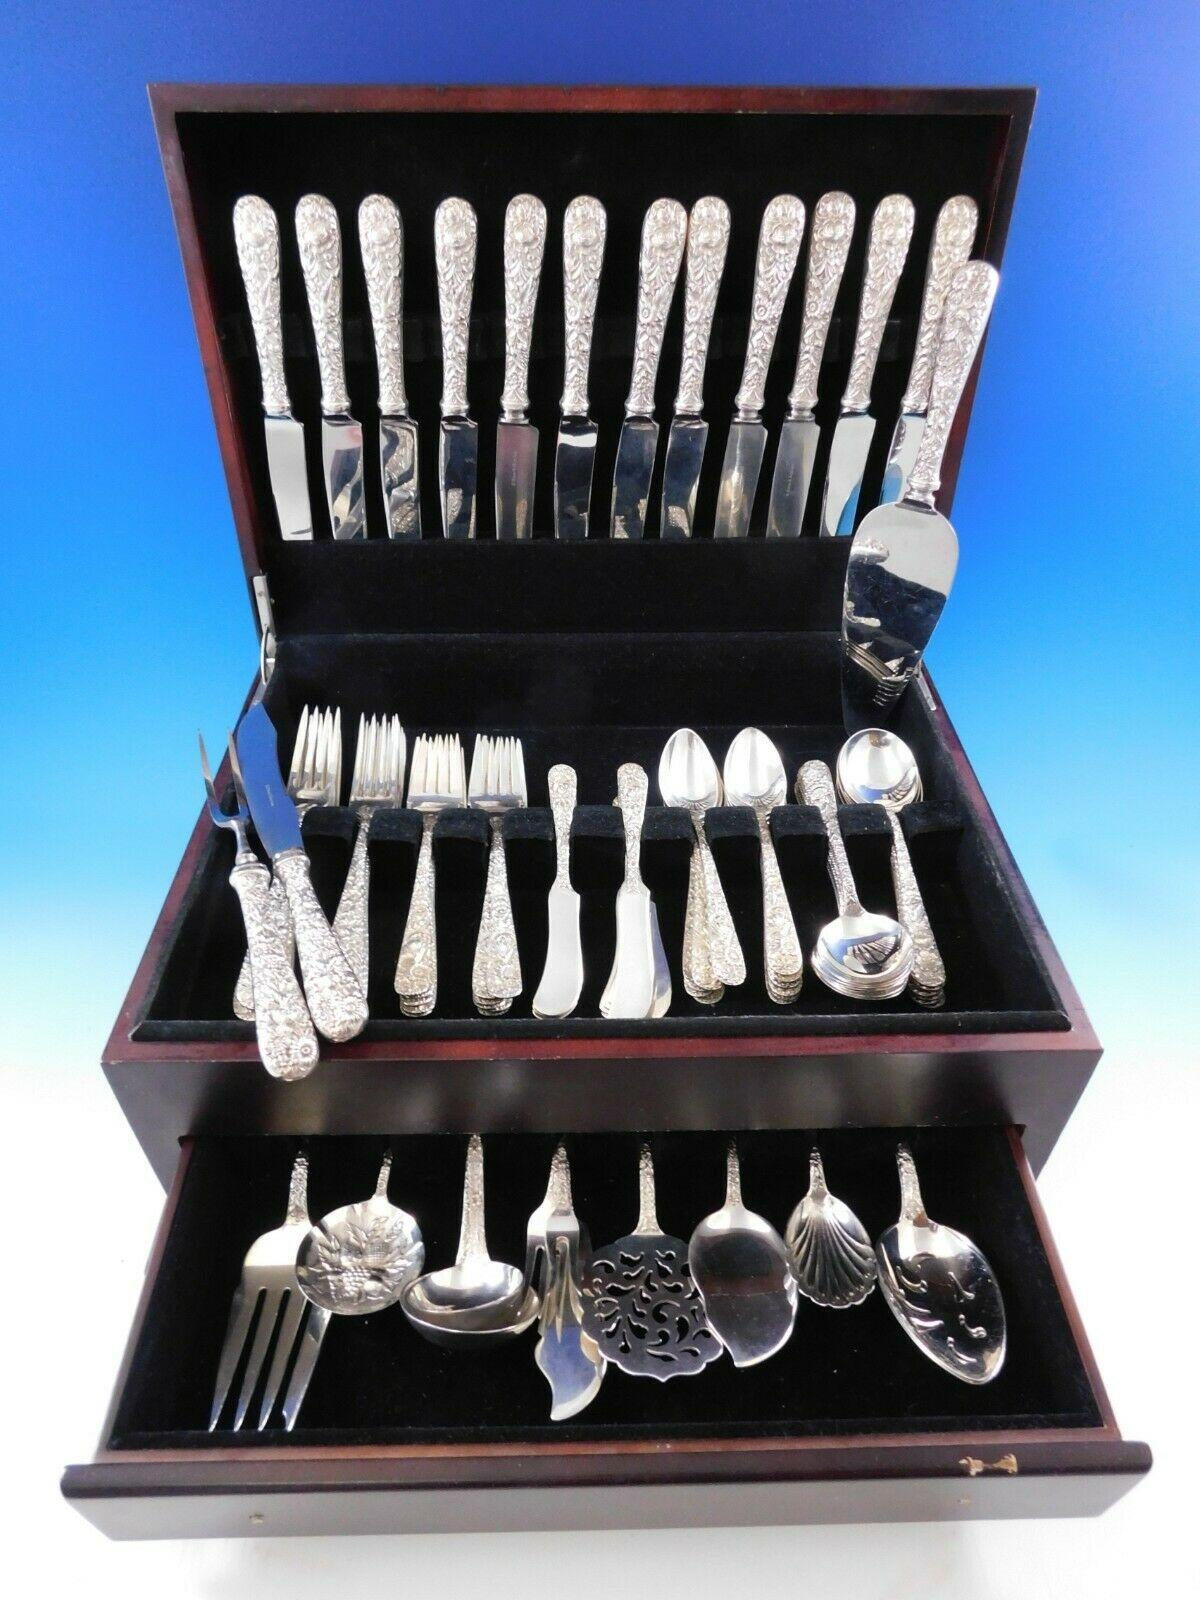 Gorgeous Repousse by Kirk sterling silver flatware set, 87 pieces. This set includes:

12 knives, 9